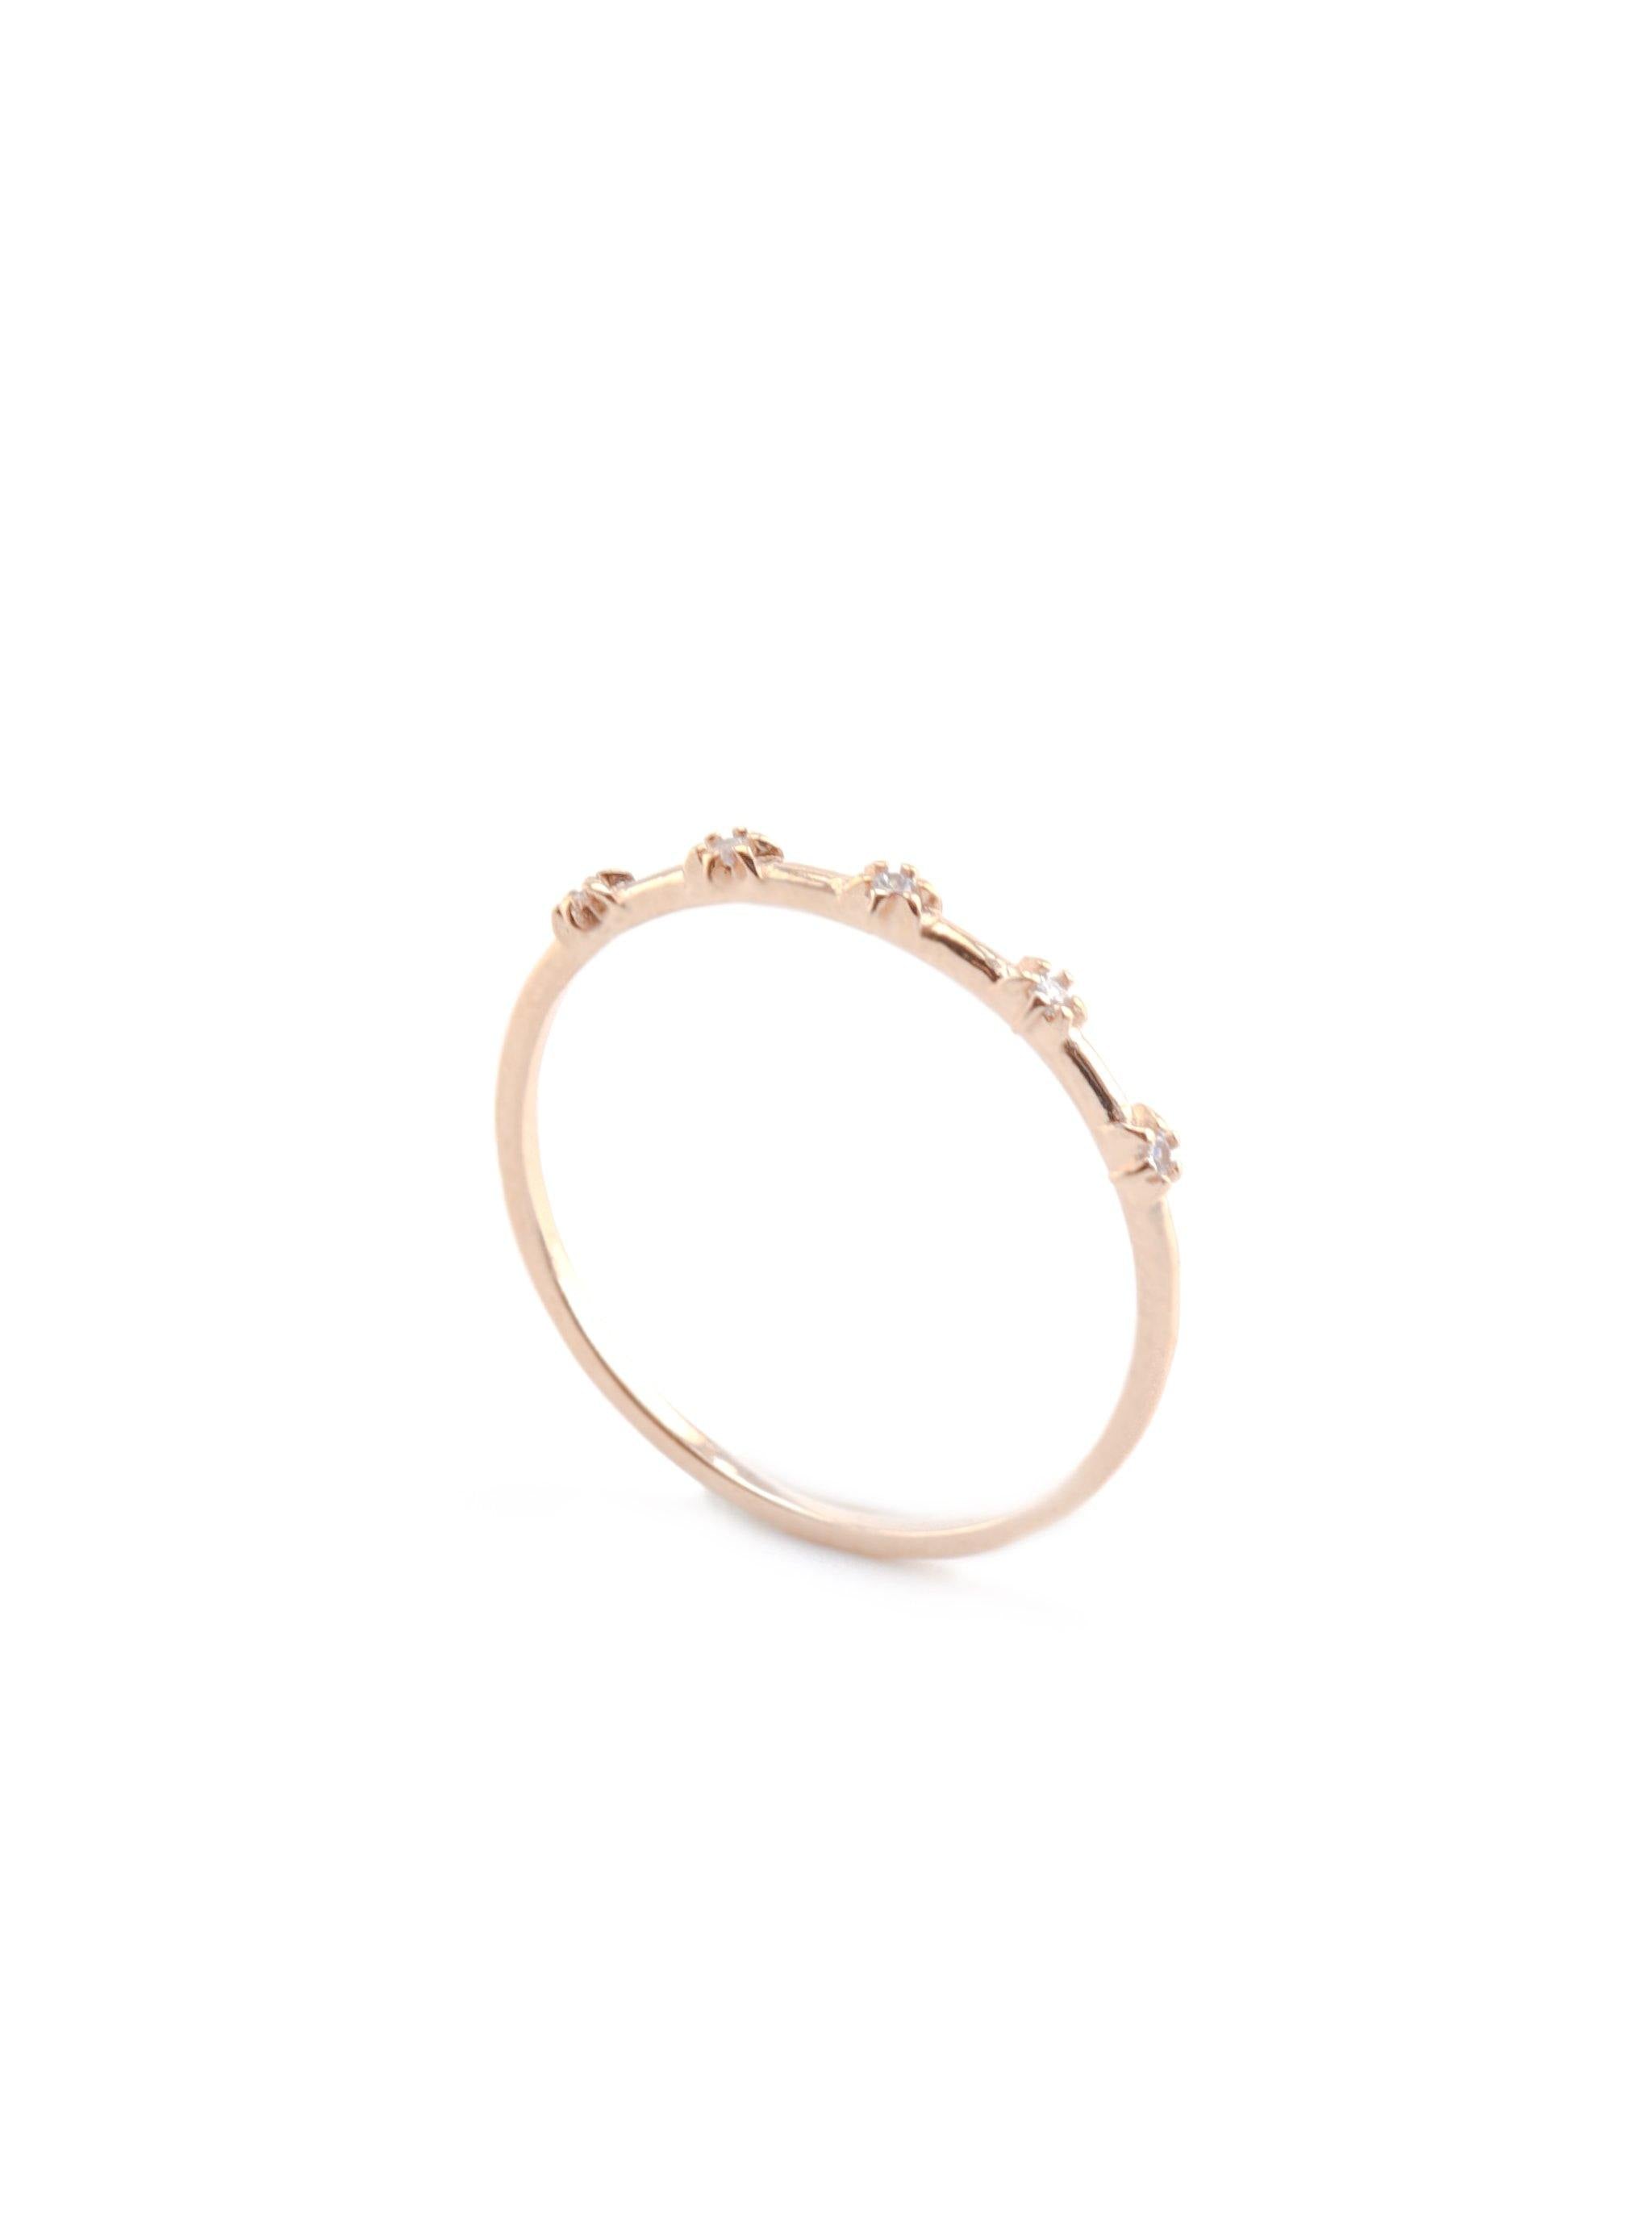 RYLIE SILVER RING - Simplique Mode